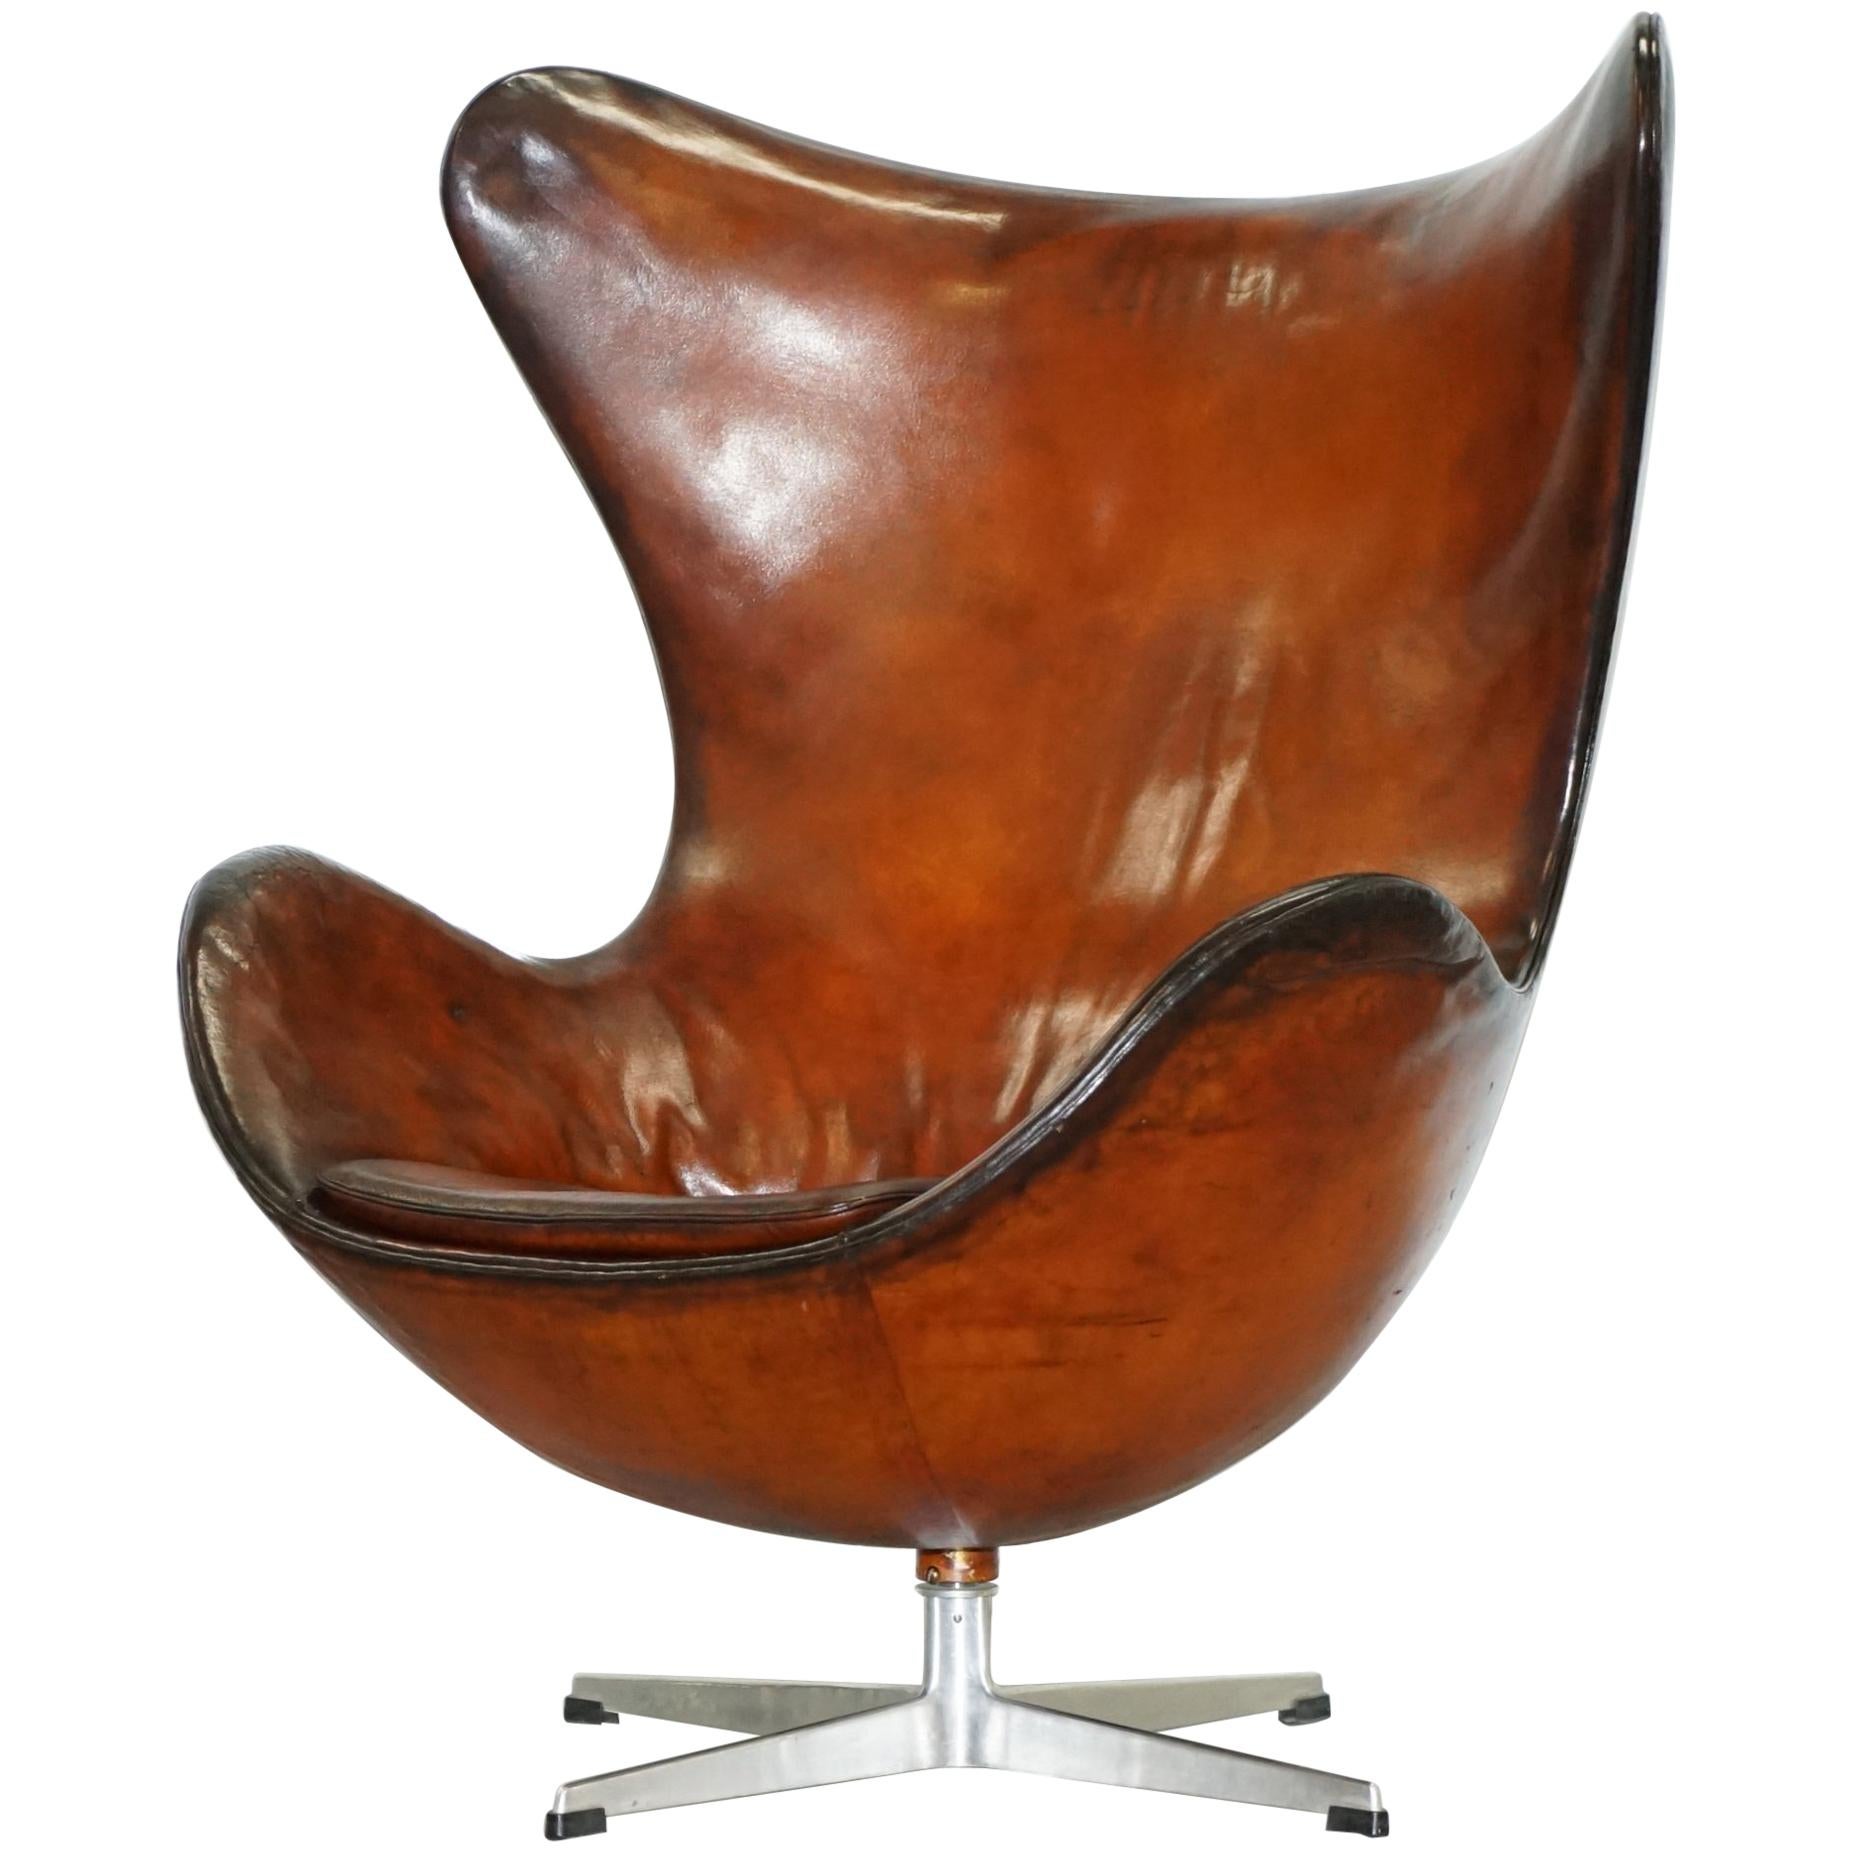 Original 1963 Fritz Hansen Egg Chair Model Number 3316 Hand Dyed Brown Leather